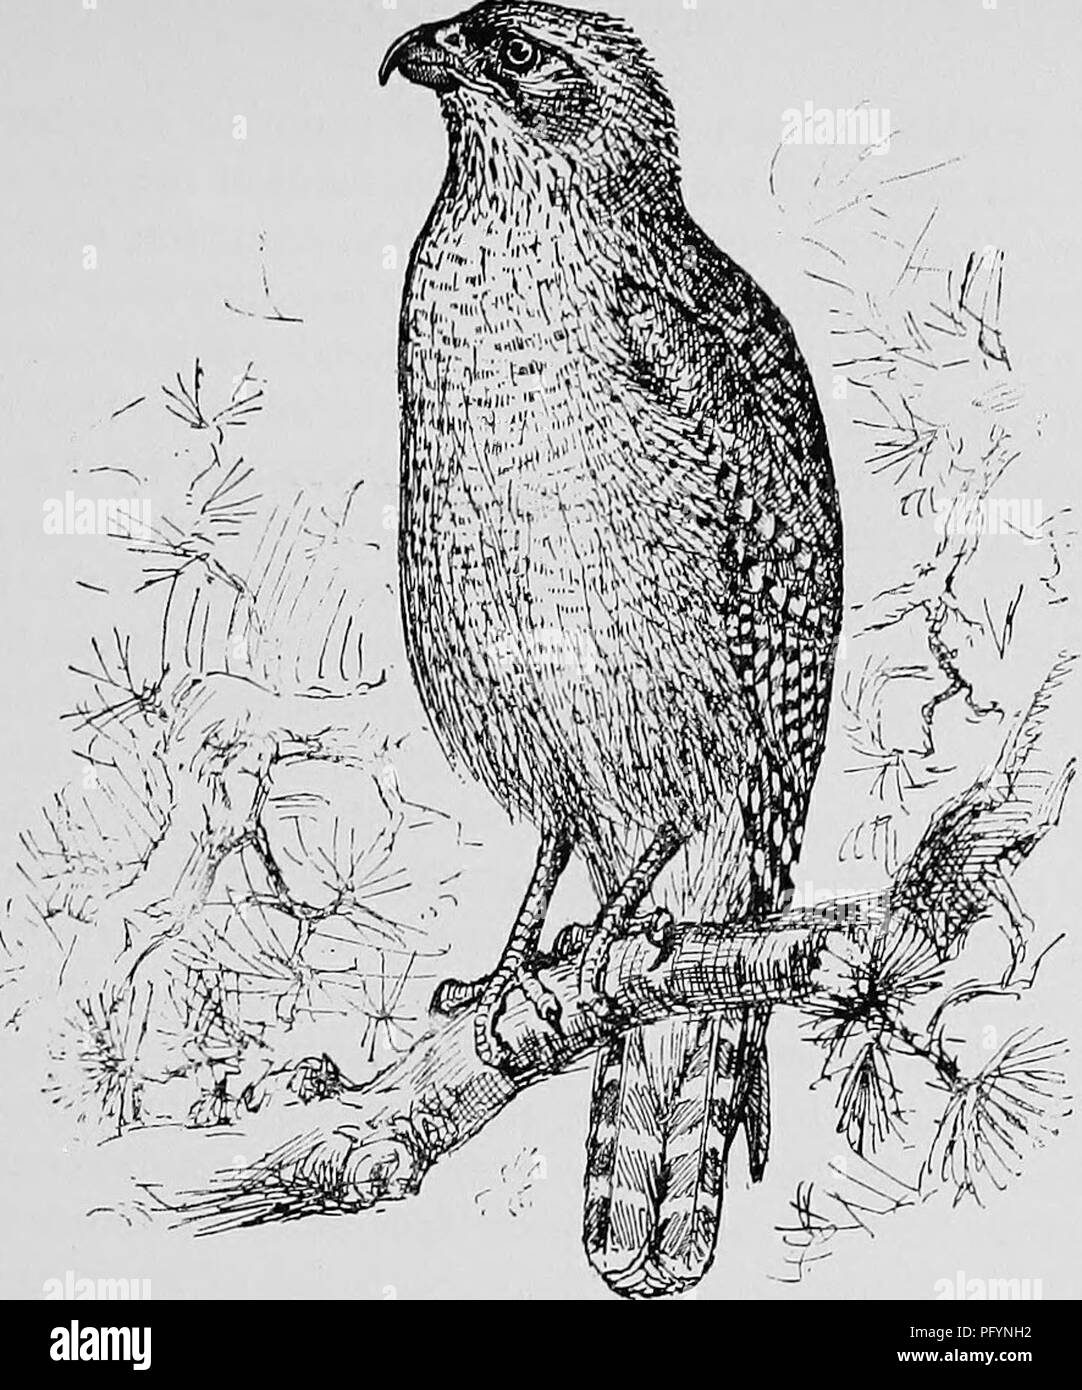 . A popular handbook of the ornithology of the United States and Canada, based on Nuttall's Manual. Birds; Birds. RED-SHOULDERED HAWK. WINTER HAWK. BUTEO LINEATUS. Char. Adult; general color dark reddish brown; head and neck ru- fous : below, lighter, with dark streaks and light bars; wings and tail black with white bars ; lesser wing-coverts chestnut. Young, with little of the rufous tinge . below, bufty with dark streaks. Length 19 to 22 inches. Nest. In a tree; of loosely arranged twigs, lined with grass and feathers. Eggs. 2-4 ; bluish white or buffy blotched with brown ; 2.20 X 1.70. This Stock Photo